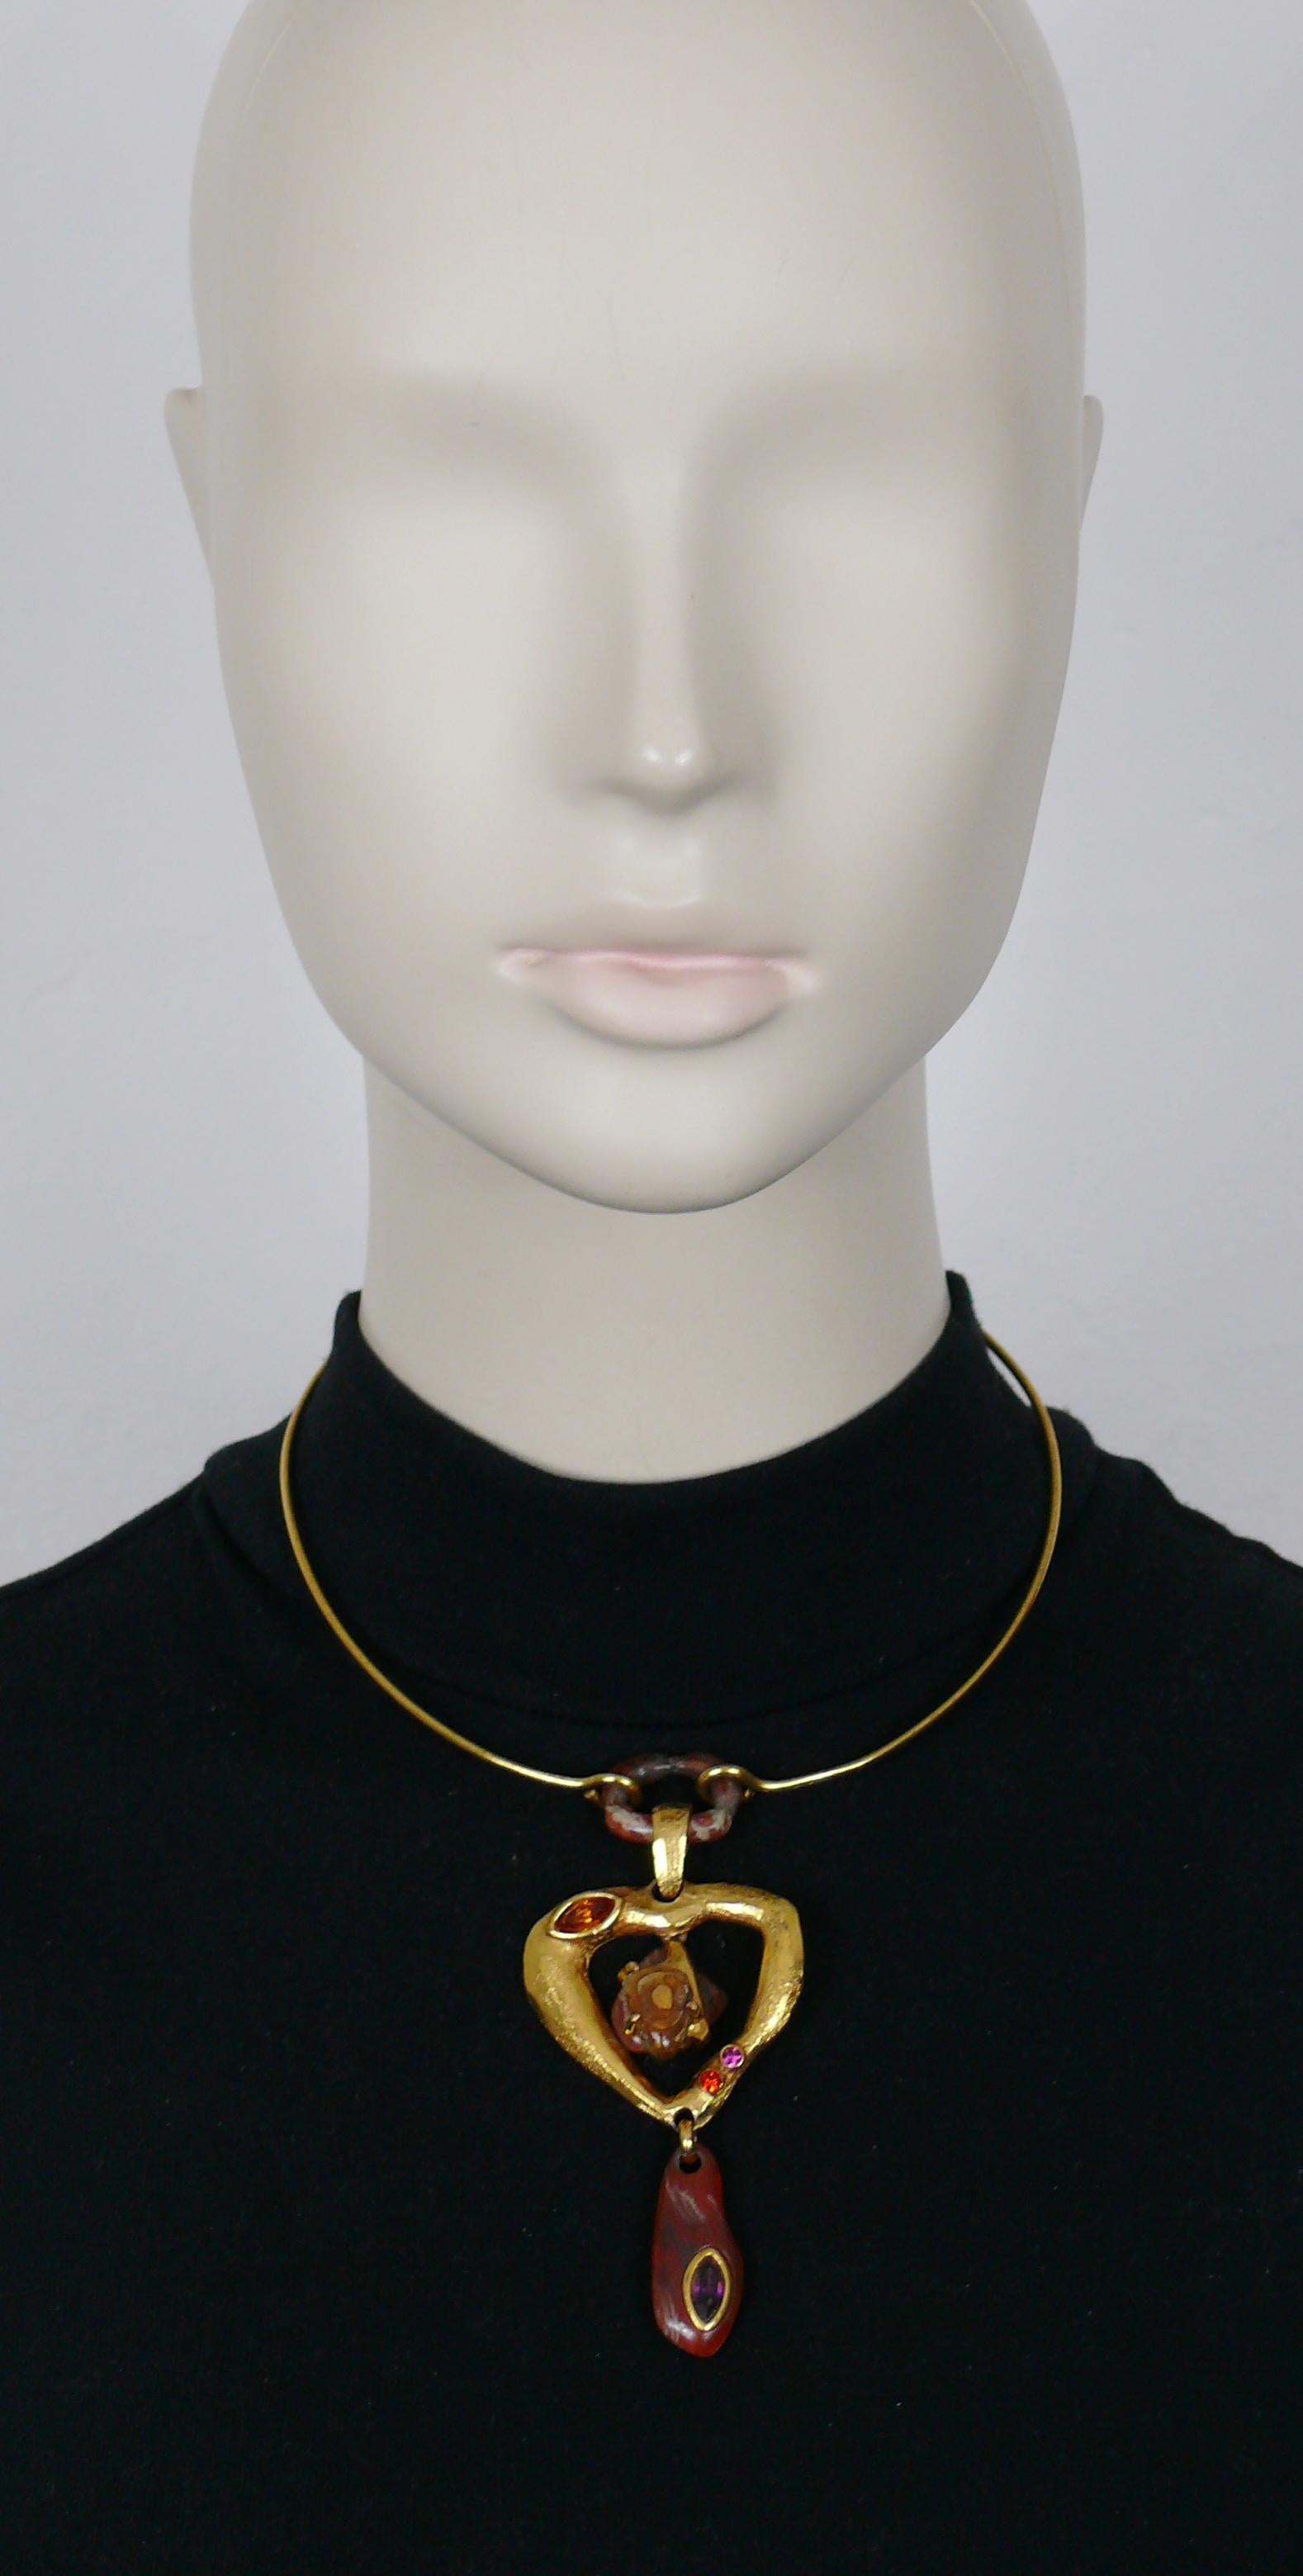 CHRISTIAN LACROIX vintage abstract heart gold tone choker necklace embellished with resin cabochons, ring and drop, multicolored crystals.

Rigid gold tone collar.

Marked CHRISTIAN LACROIX CL Made in France.

Indicative measurements : inner